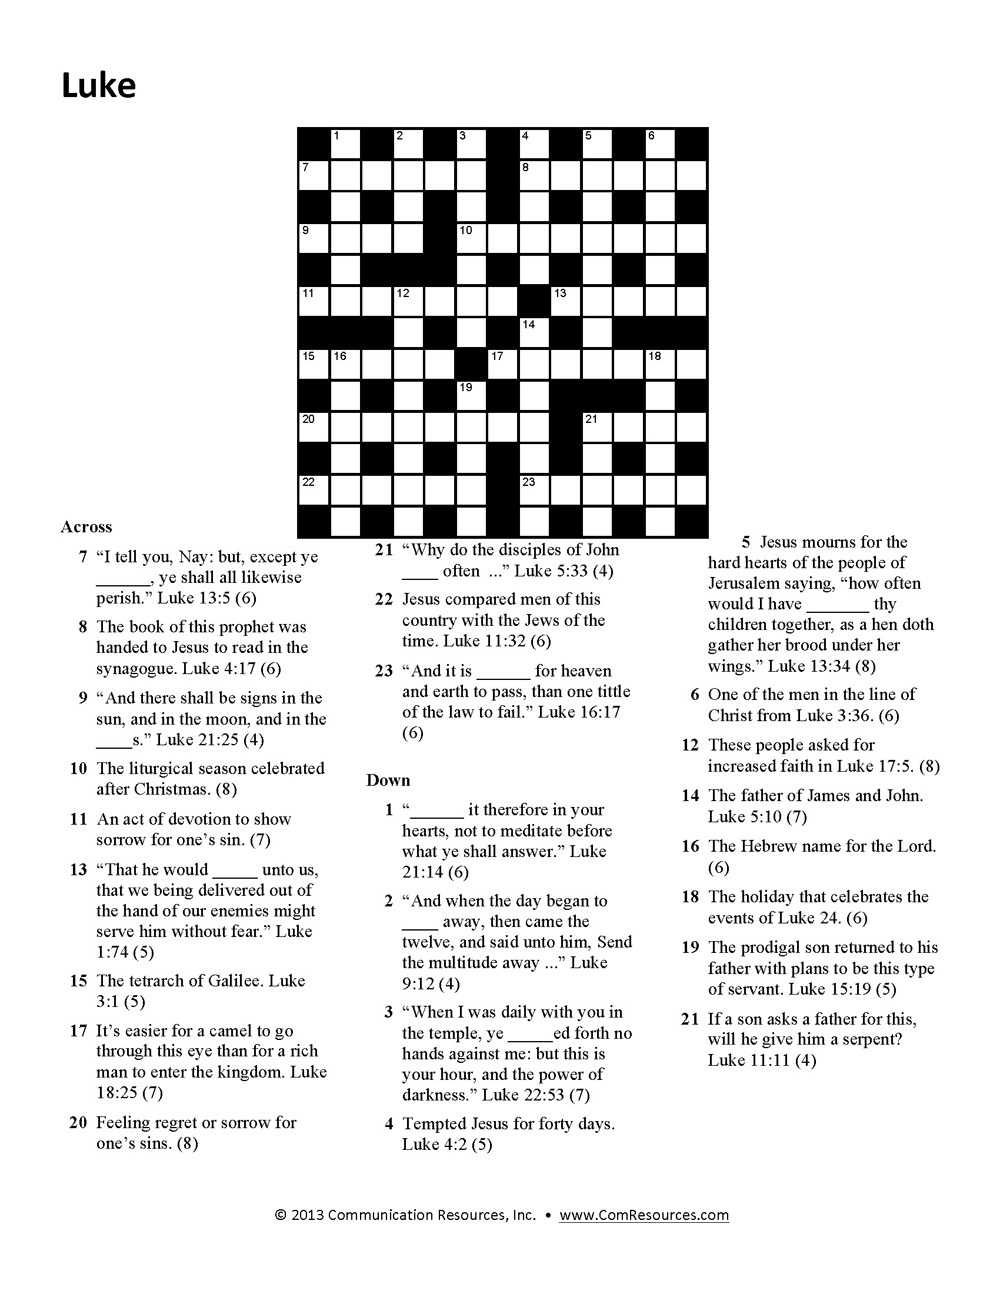 15 Fun Bible Crossword Puzzles | Kittybabylove - Bible Crossword Puzzles Printable With Answers